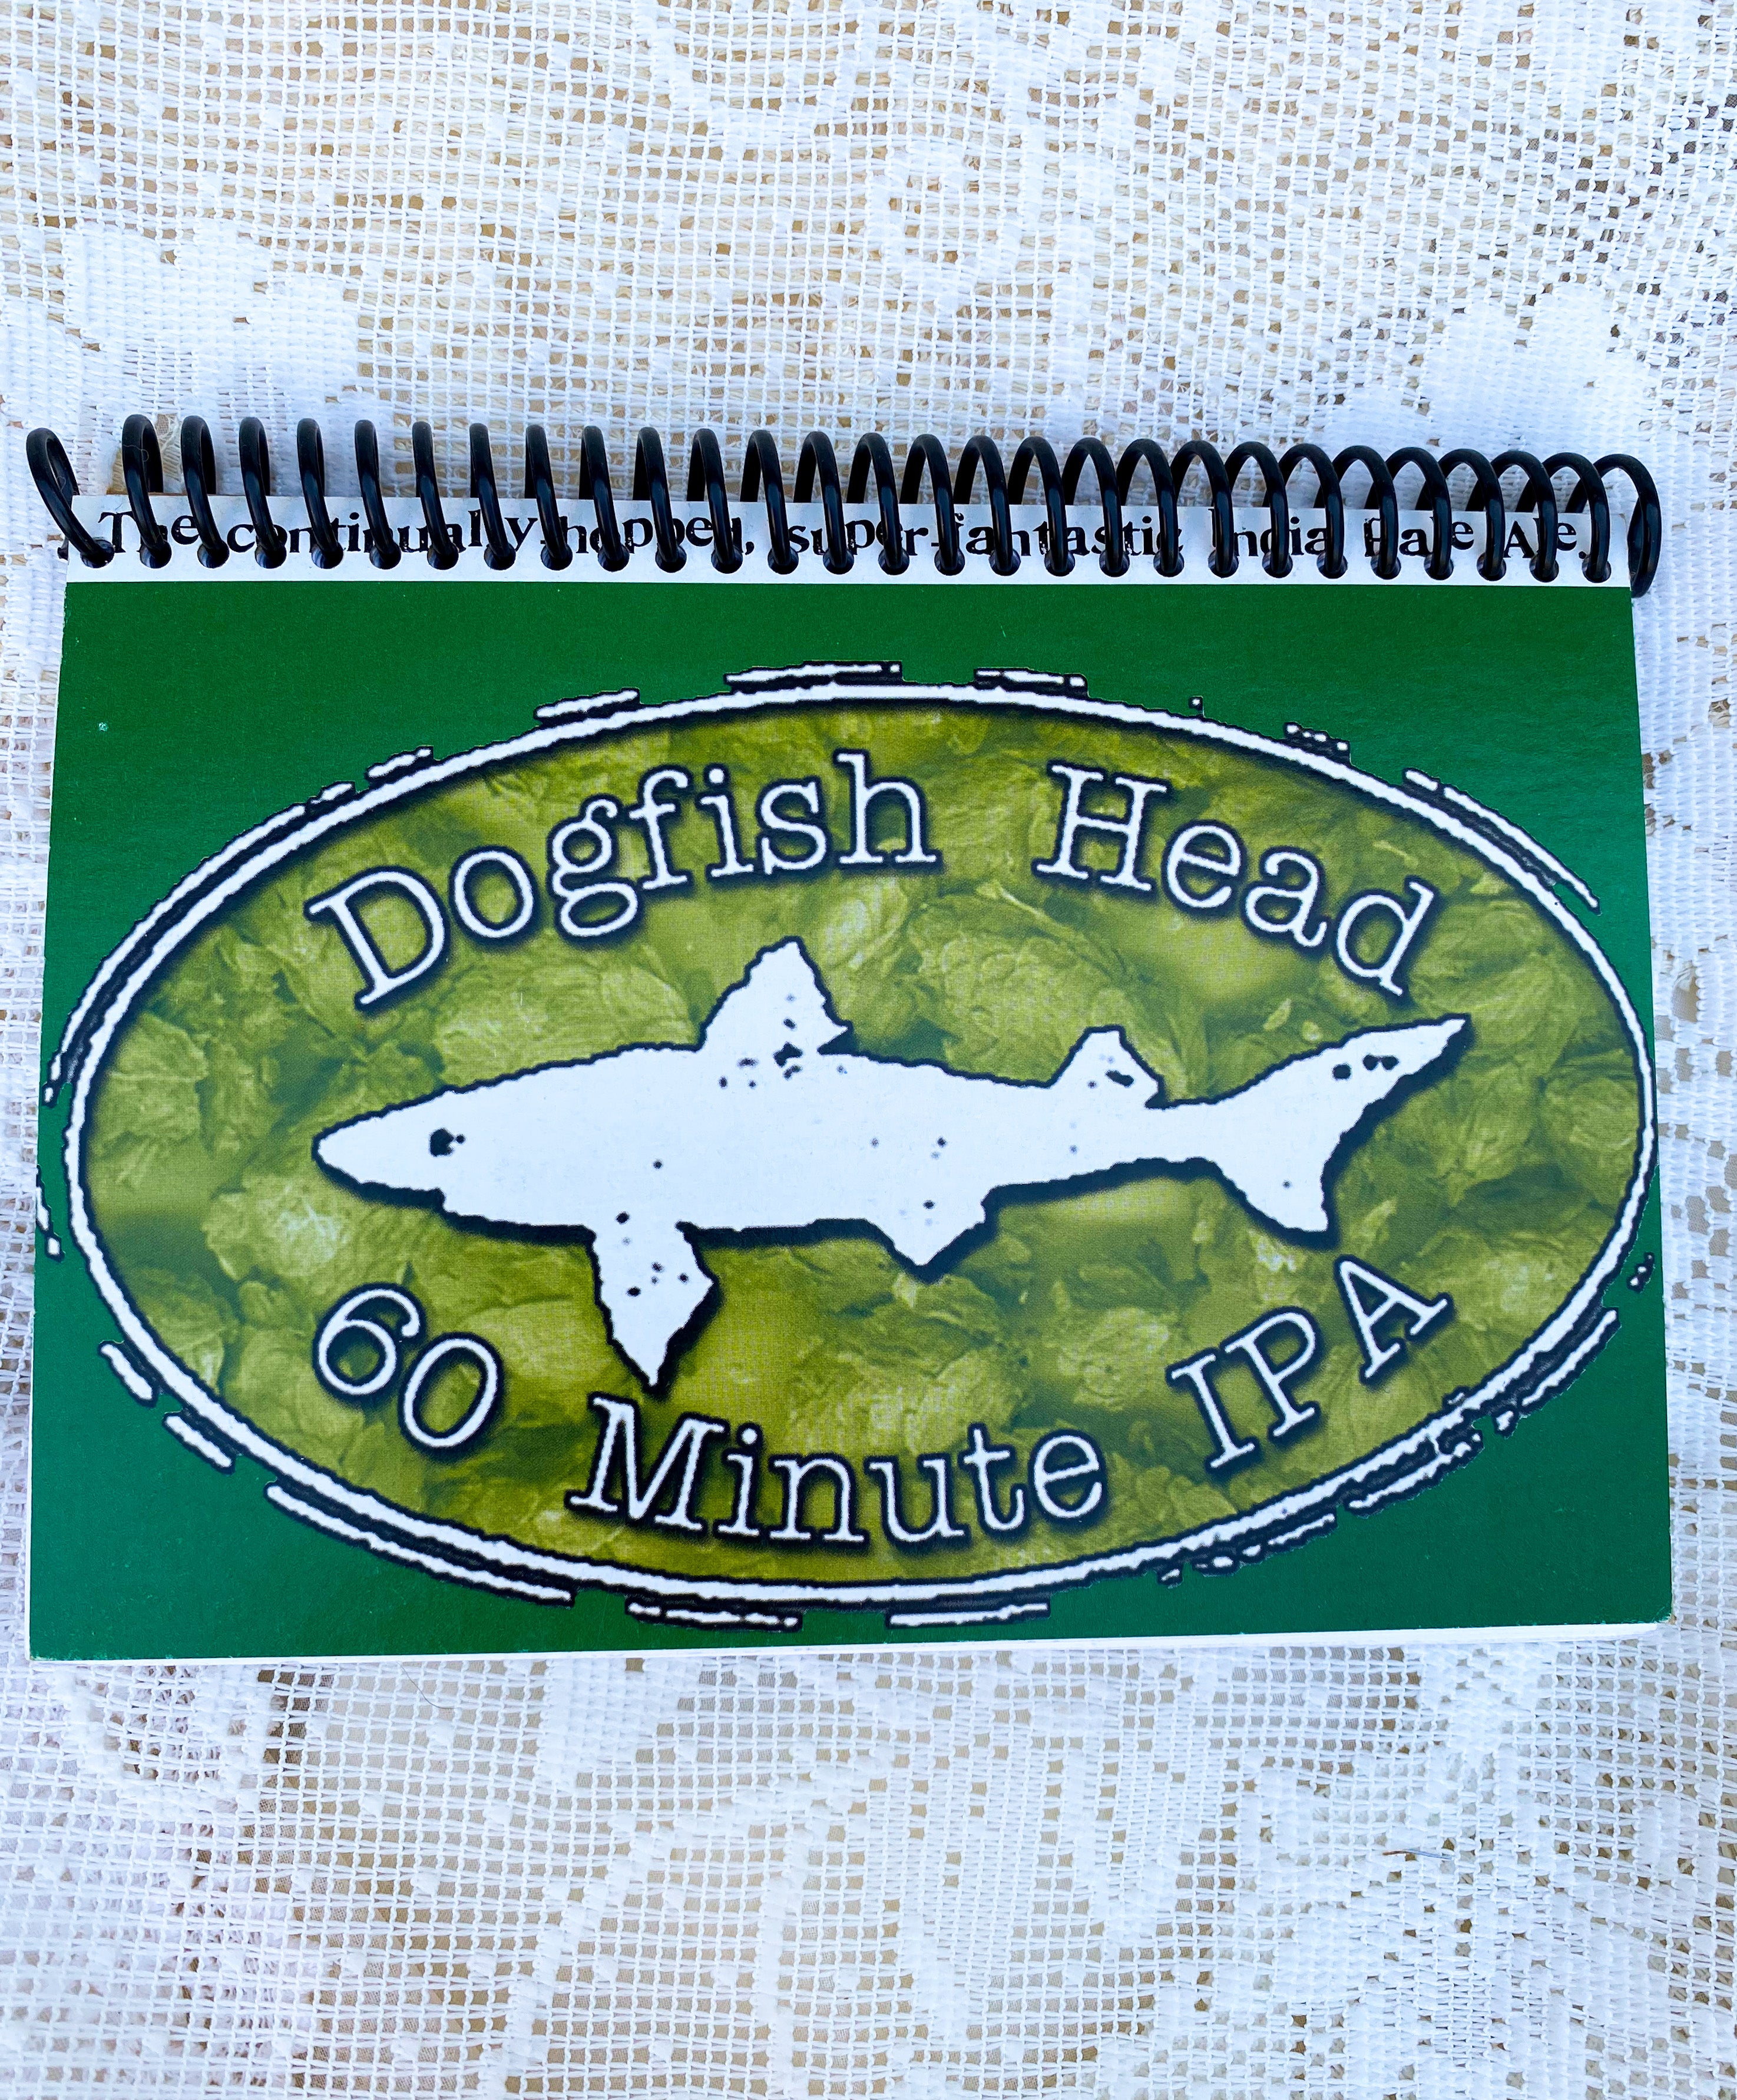 Dogfish Head Recycled Beer Carton Notebook